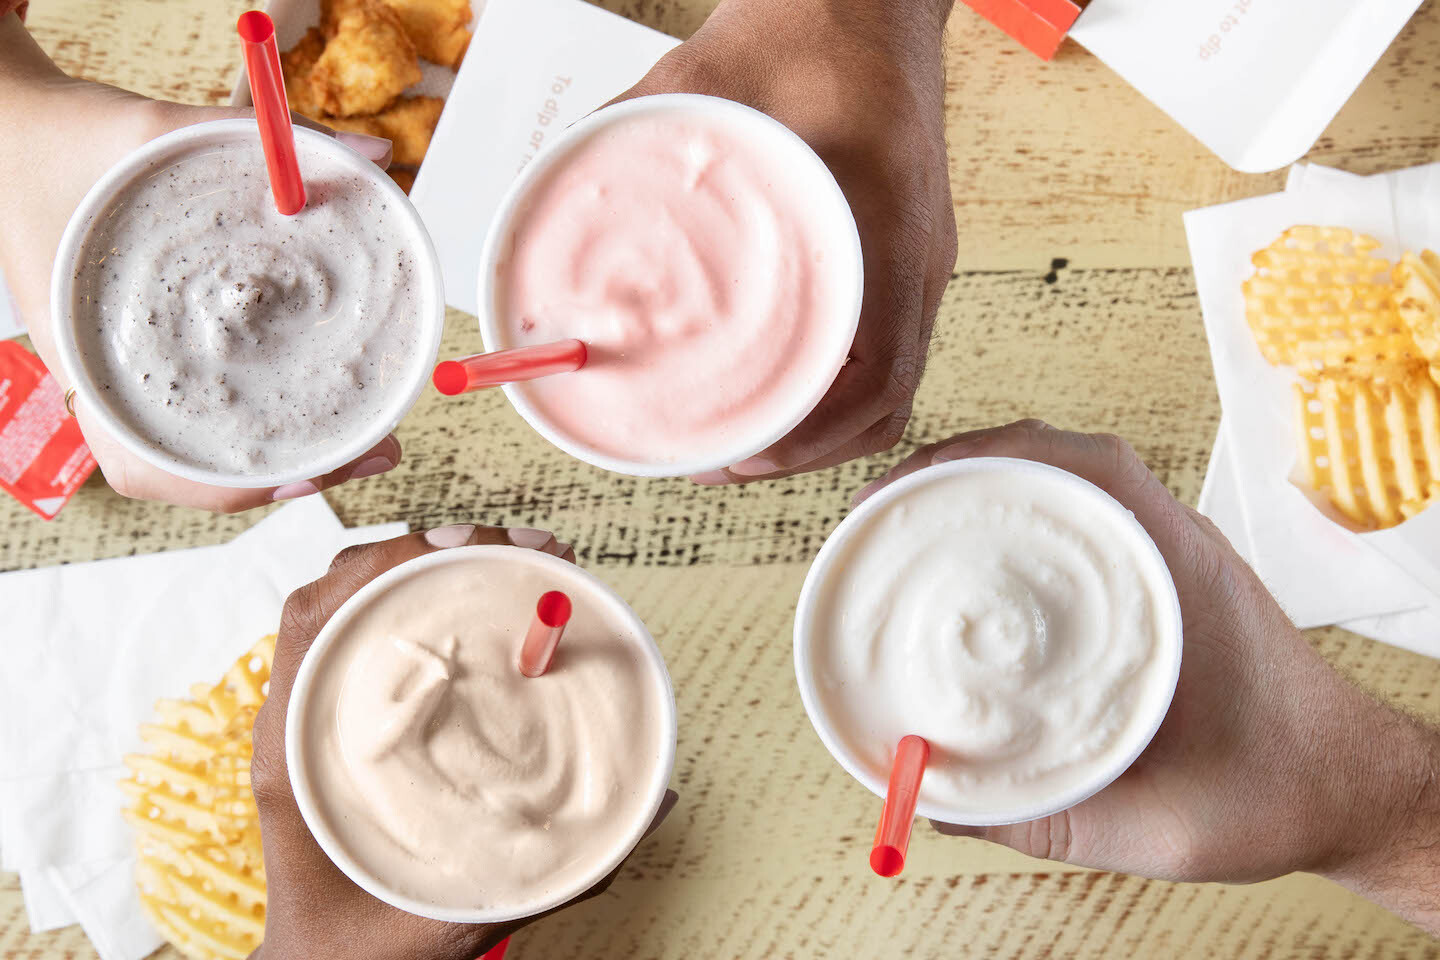 Can We Guess Your Age and Gender Based on Your Chick-fil-A Order? Chick-fil-A milkshakes